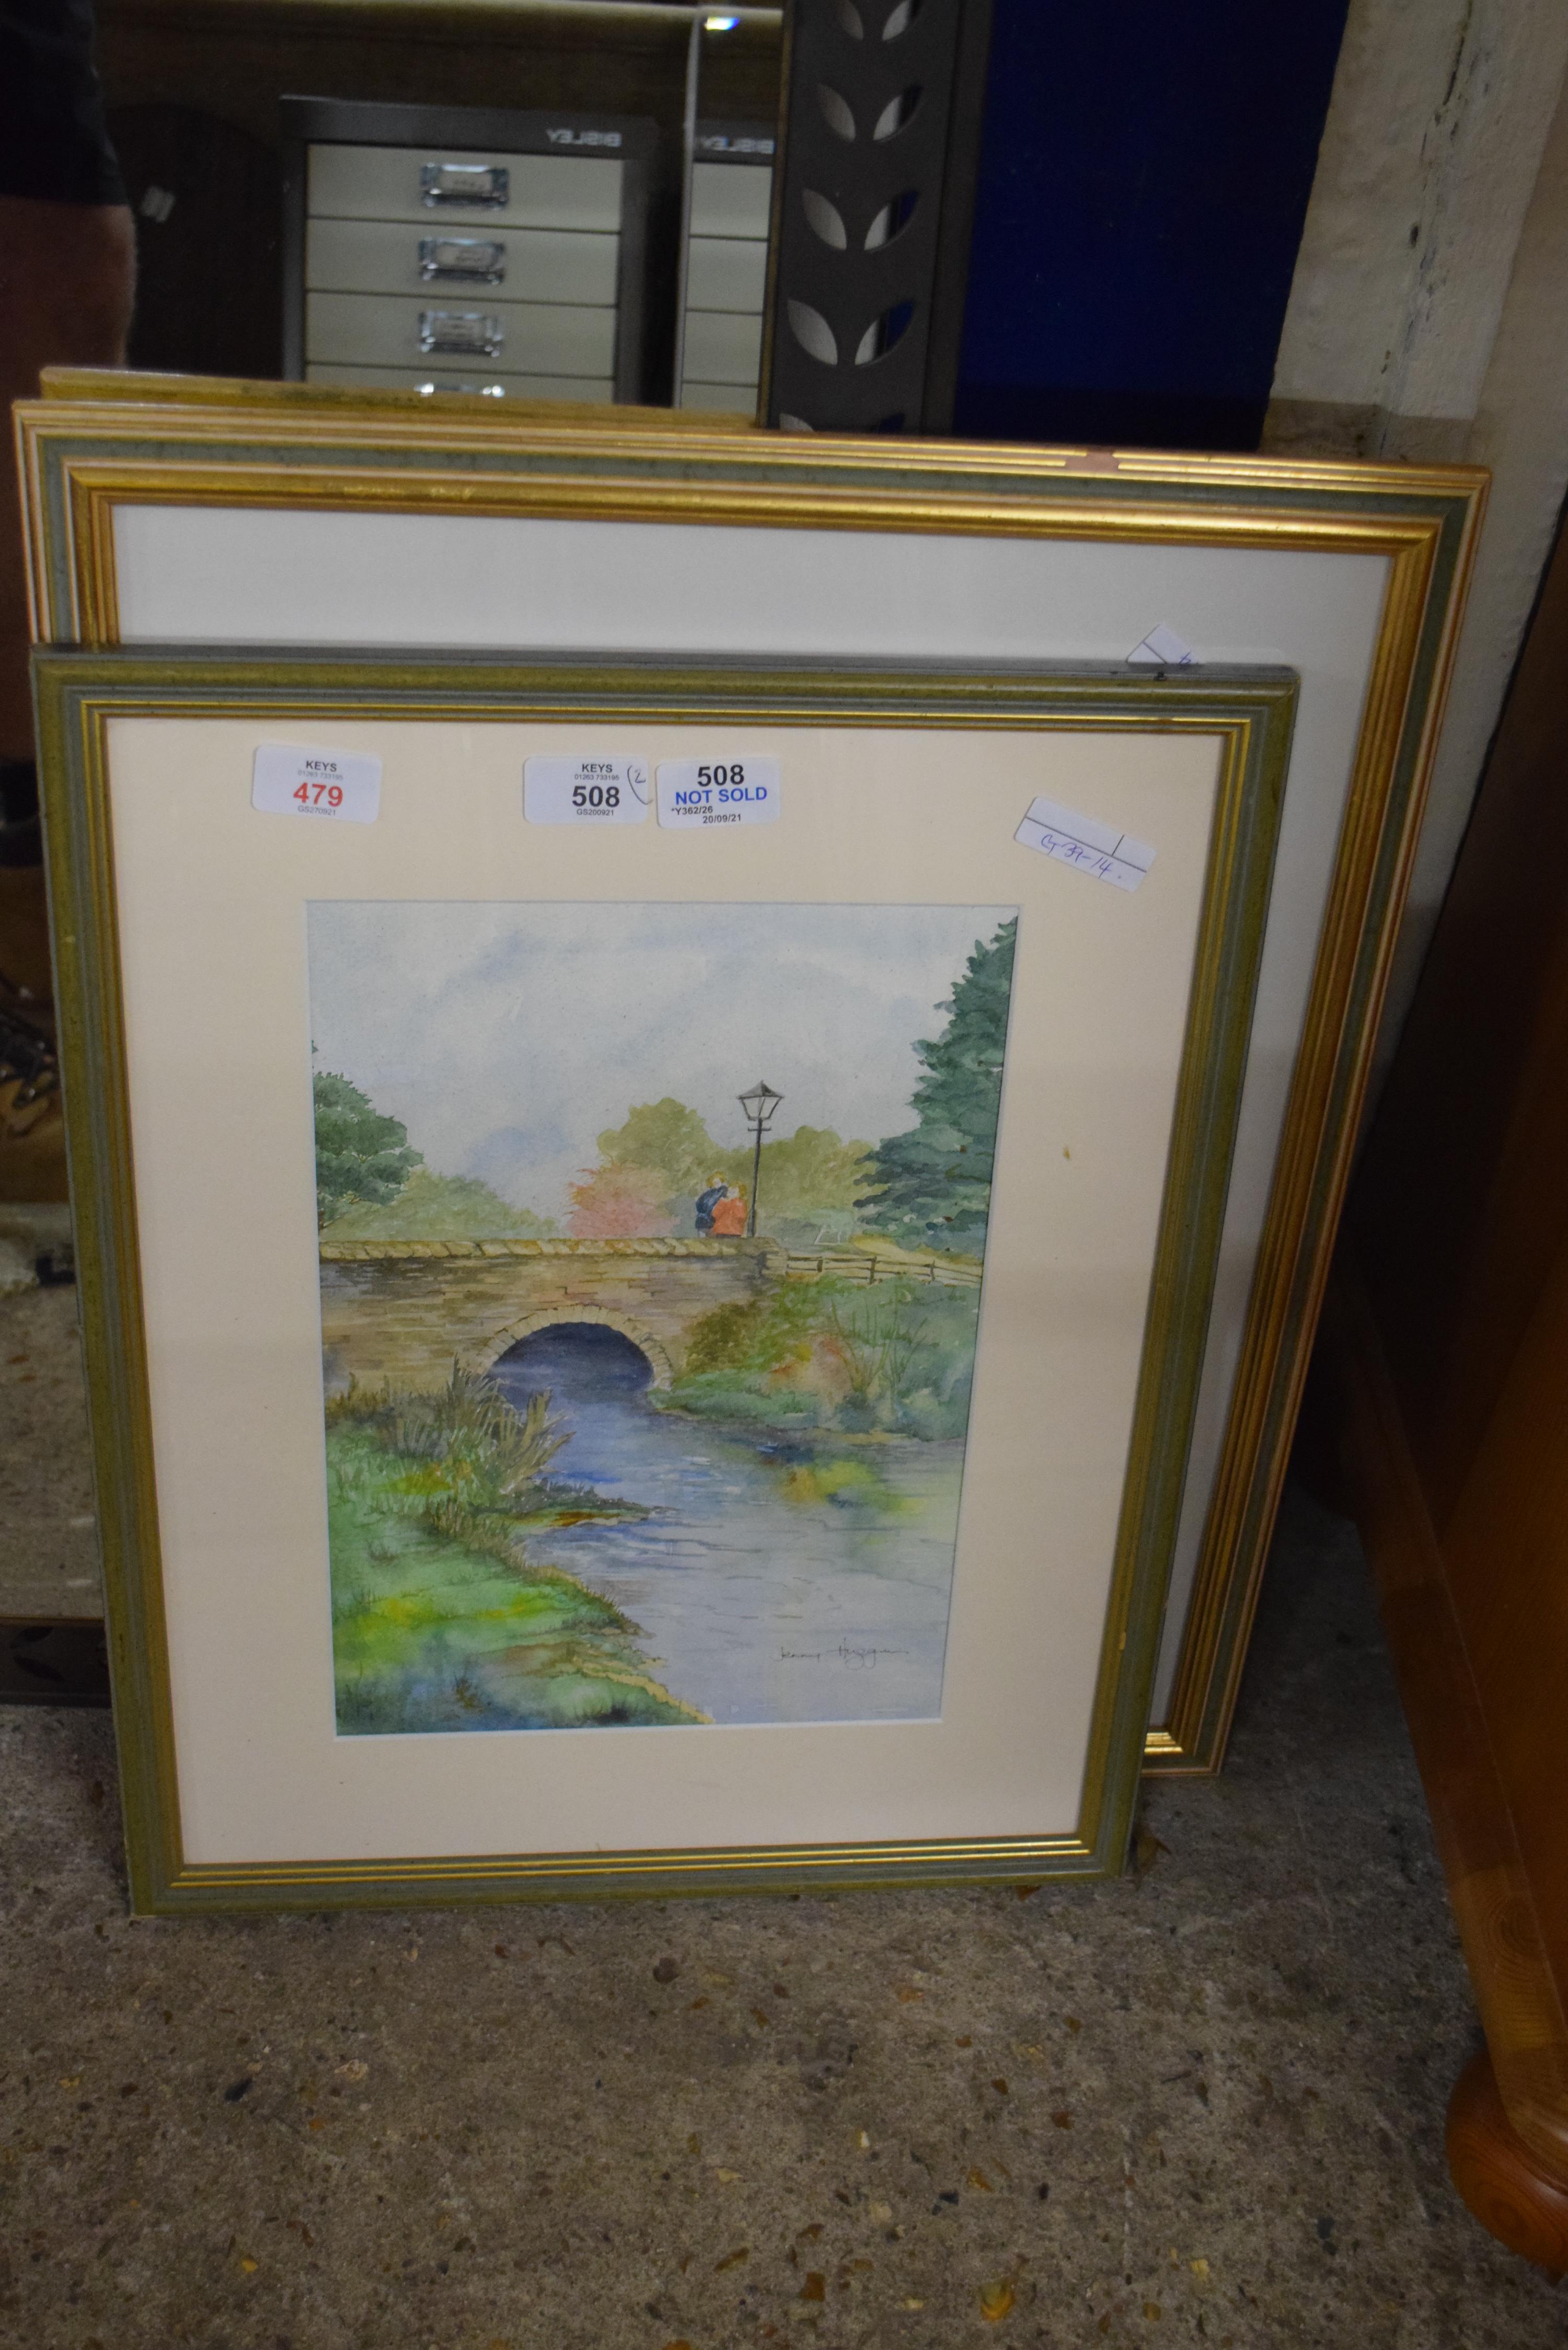 JENNY HUGGINS, 'ENJOYING THE VIEW SCULTHORPE NR FAKENHAM', WATERCOLOUR, TOGETHER WITH ANGELA